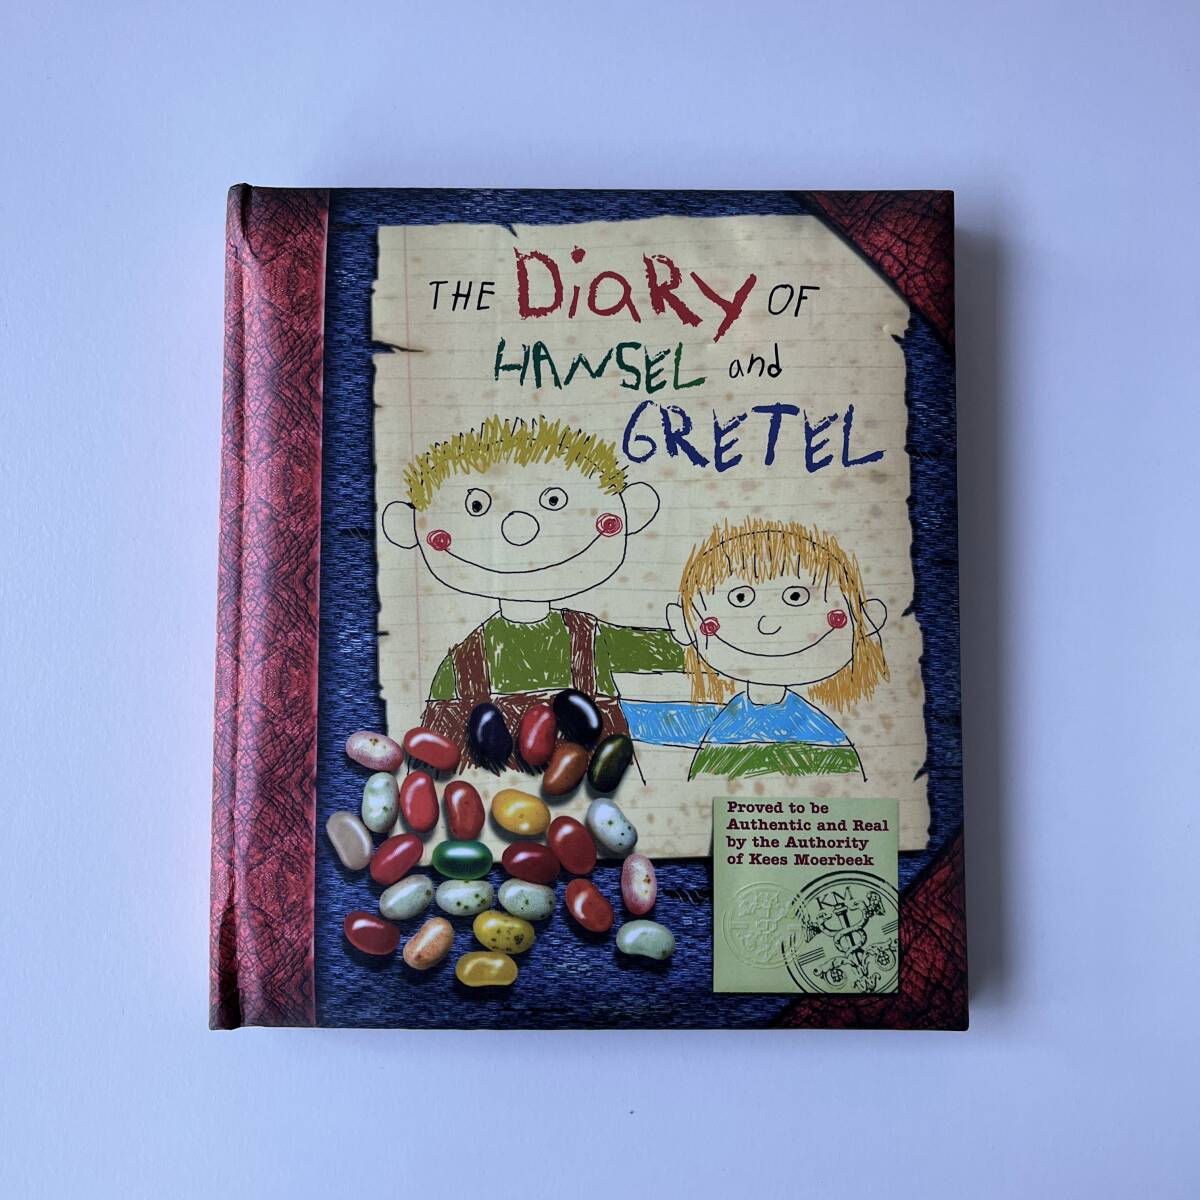 THE DIARY OF HANSEL AND GRETEL